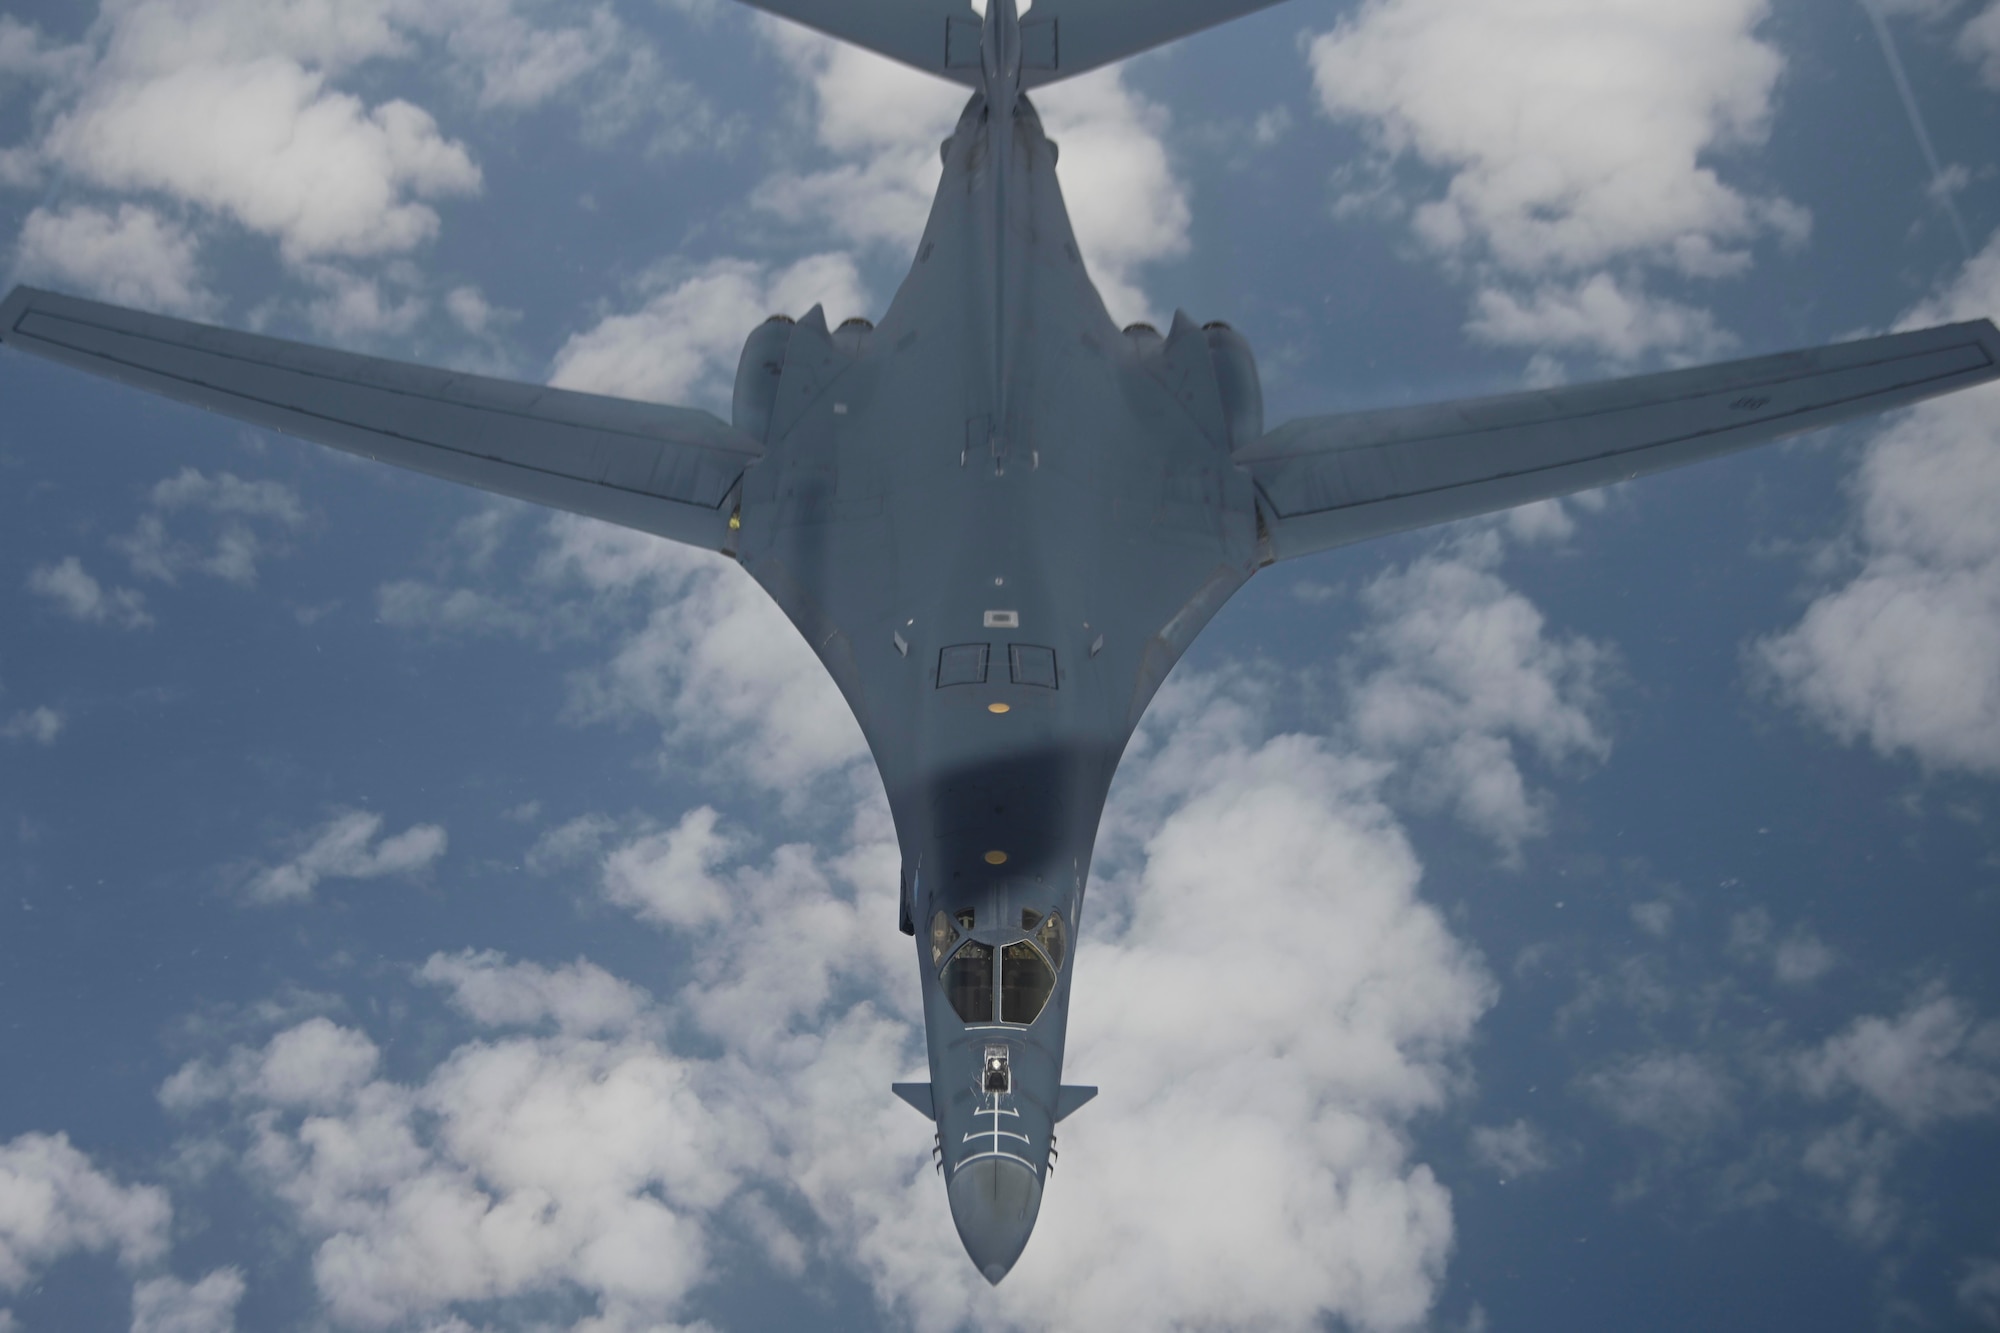 A U.S. Air Force B-1B Lancer aircraft assigned to the 28th Bomb Wing departs from a KC-135 Stratotanker aircraft assigned to the 100th Air Refueling Wing after receiving fuel during a Bomber Task Force mission over the Mediterranean Sea, April 7, 2021. U.S. bomber aircraft contribute to European regional security with the support of U.S. Air Forces in Europe and Air Forces Africa’s only permanent air refueling wing. (U.S. Air Force photo by Senior Airman Joseph Barron)